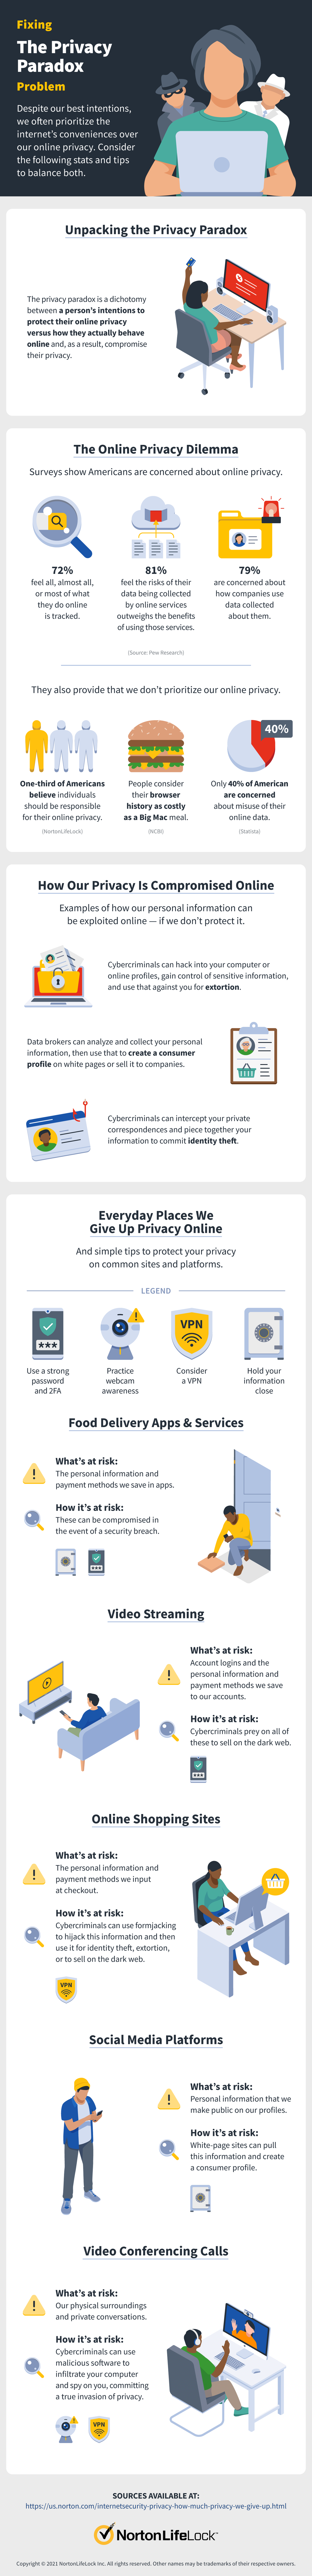 An infographic created by Norton that’s an overview of the privacy paradox, including what it means and places we sacrifice our online privacy out of convenience, plus tips to protect our online privacy.